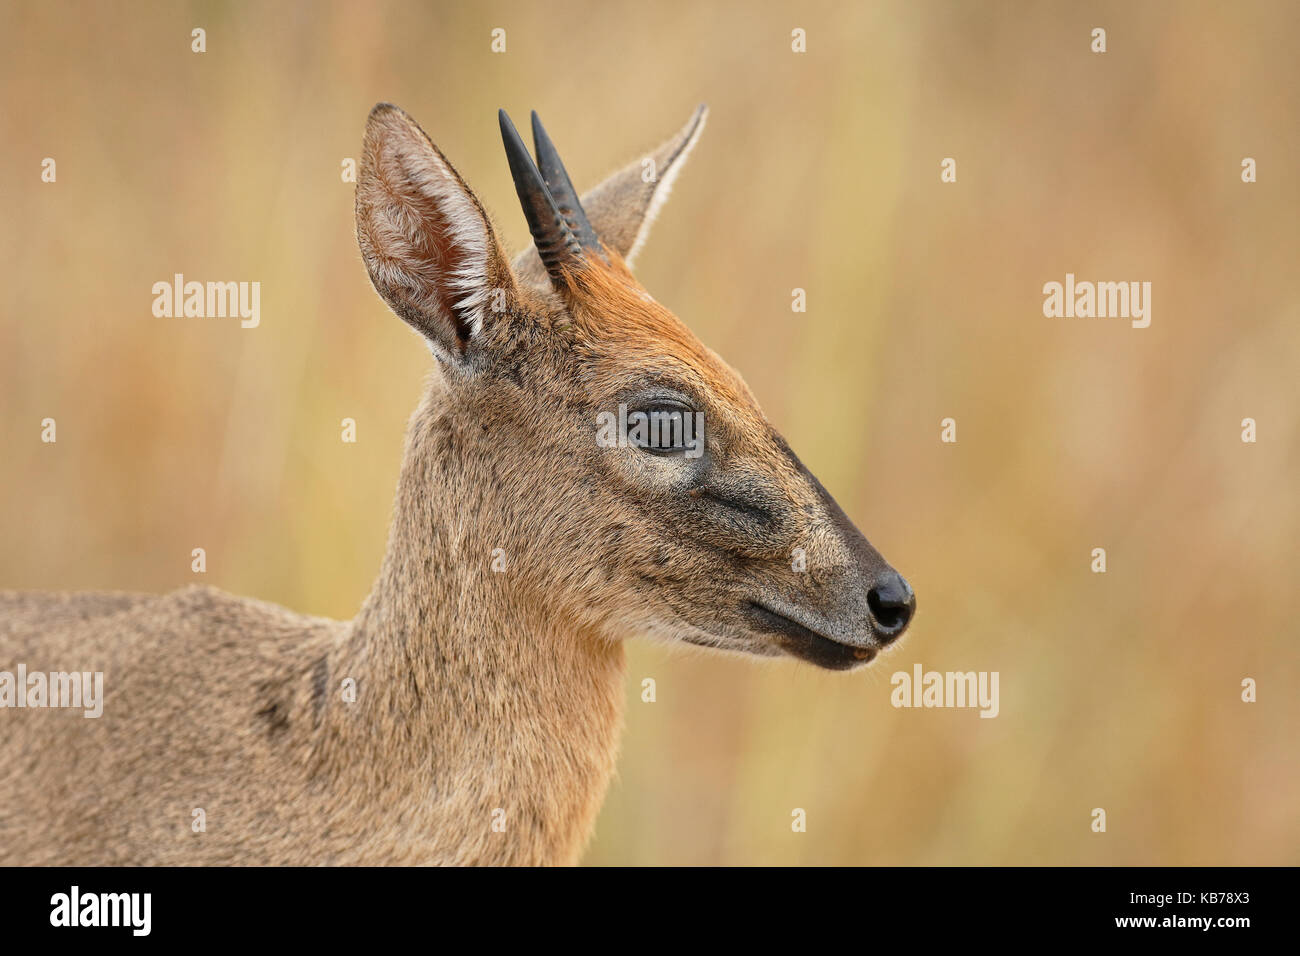 Common Duiker (Sylvicapra grimmia) portrait of a male, South Africa, Mpumalanga, Kruger National Park Stock Photo